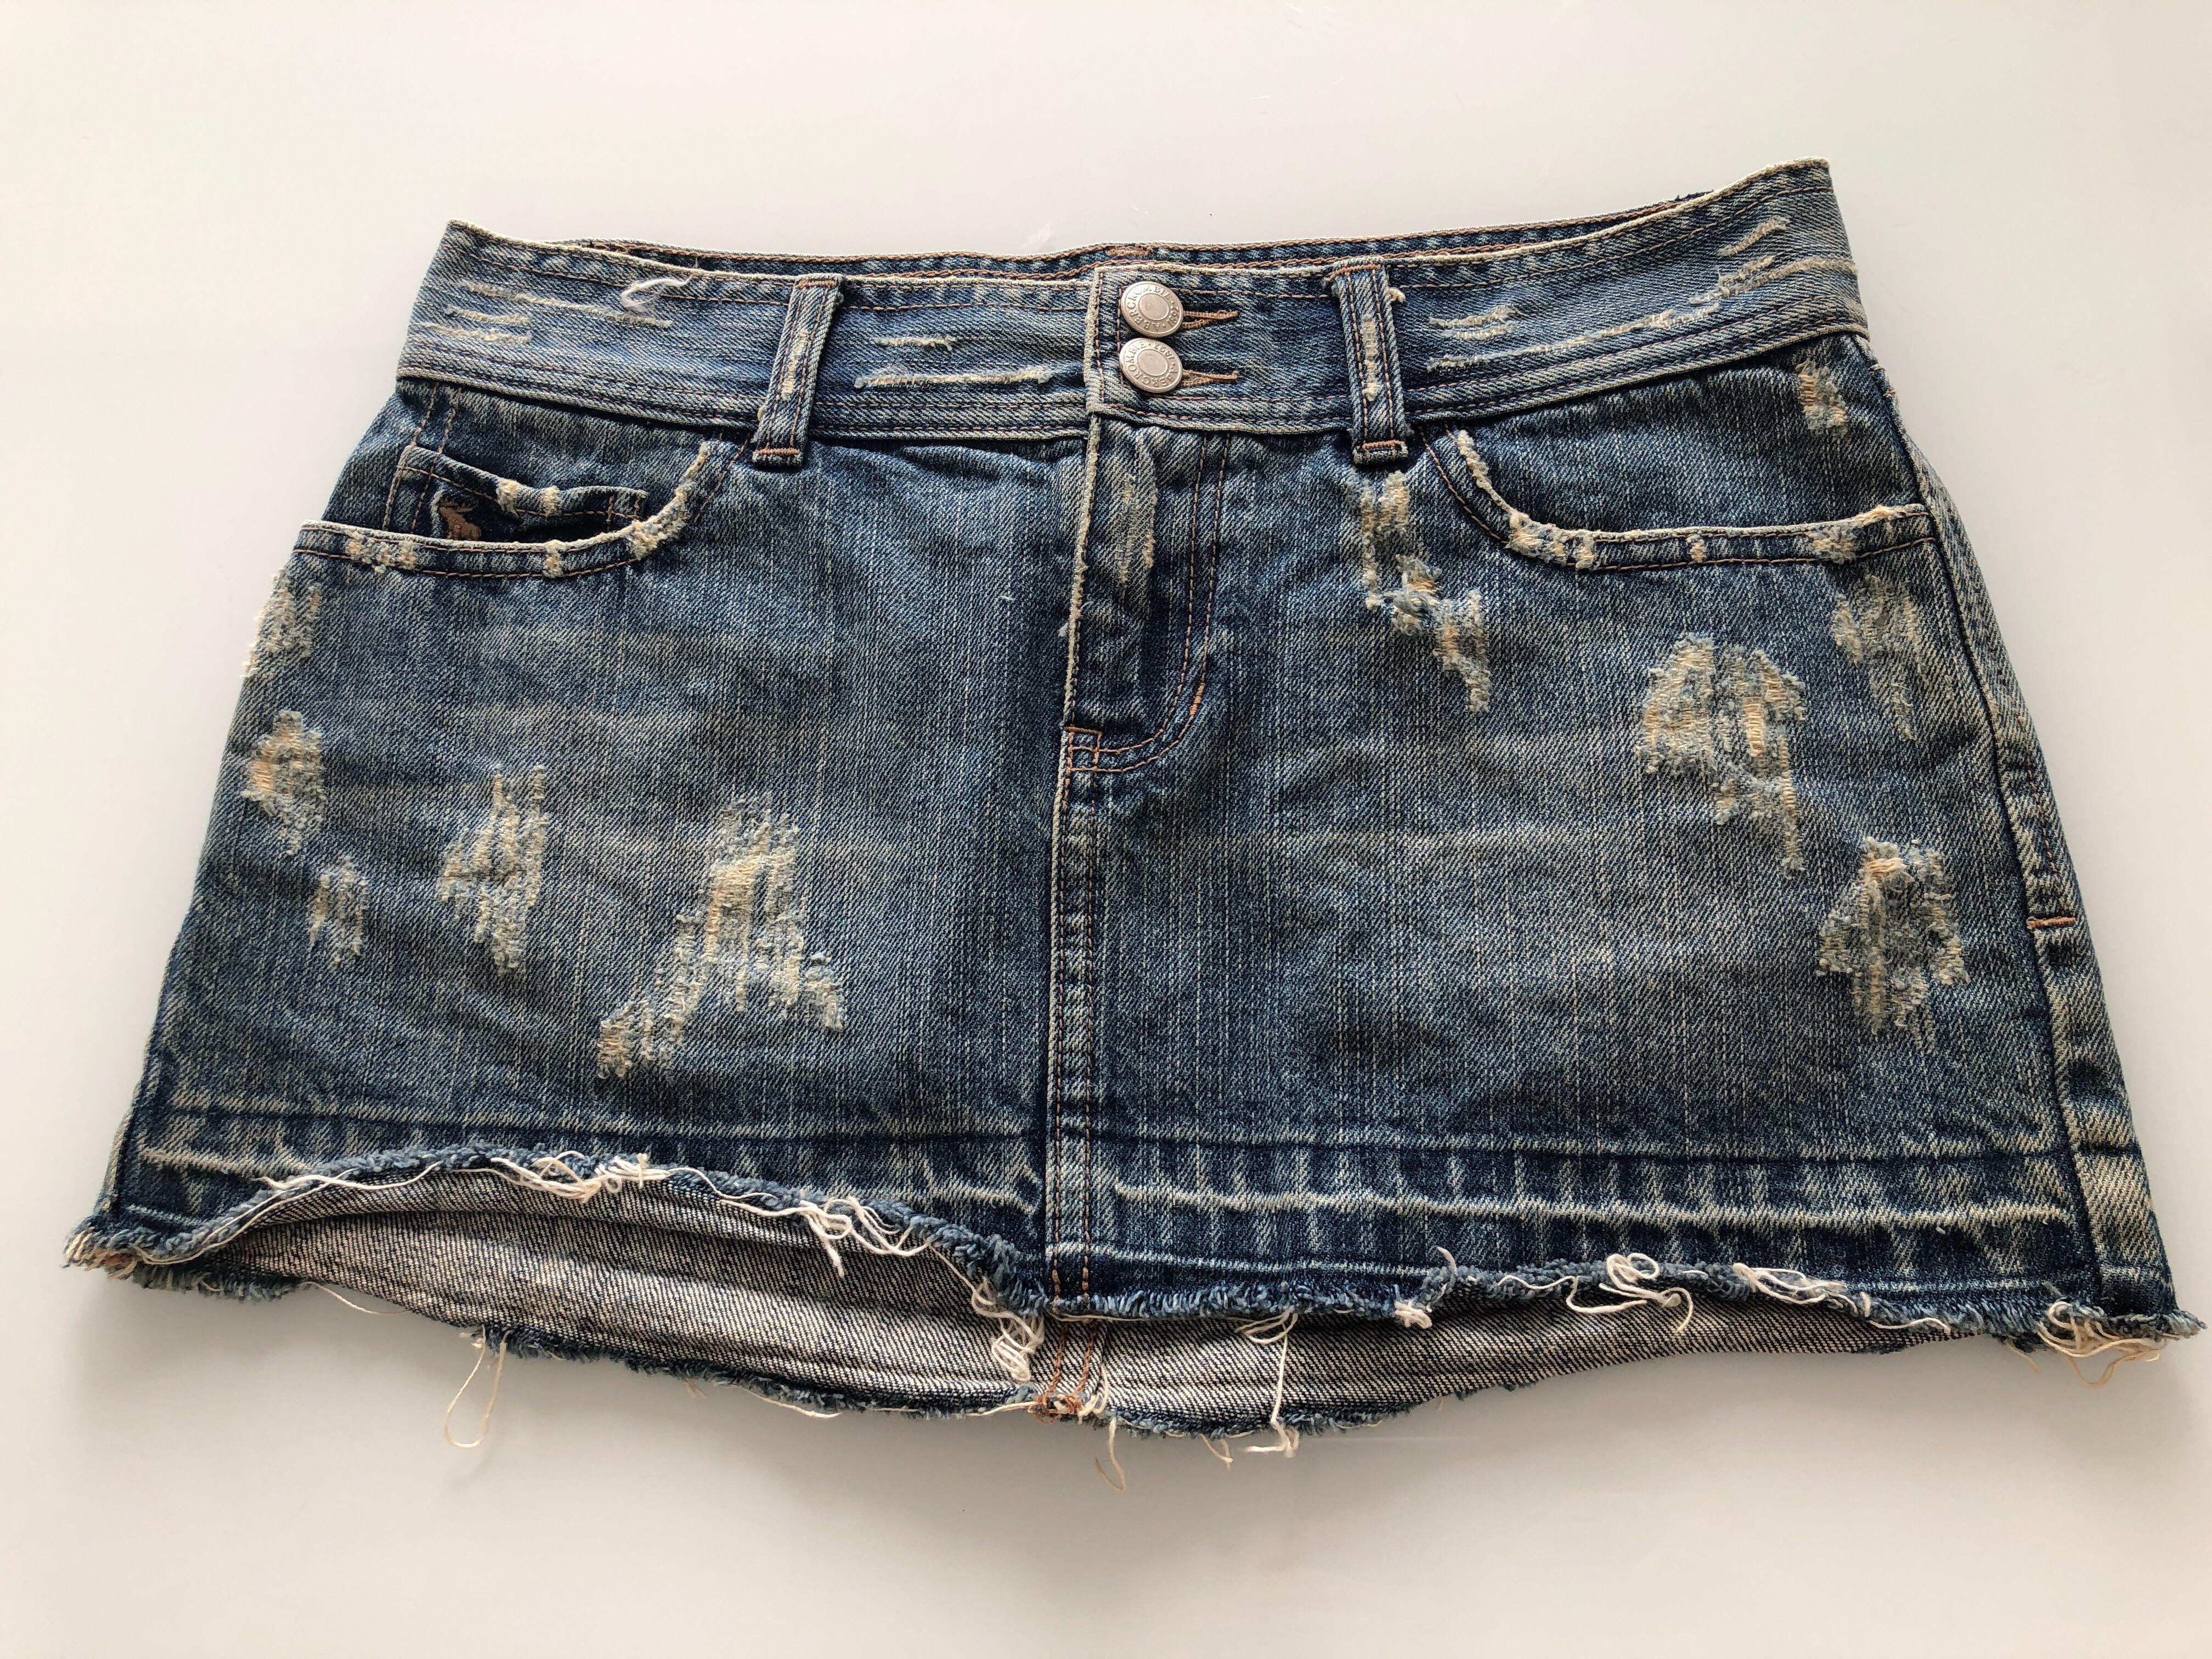 abercrombie and fitch jean skirt